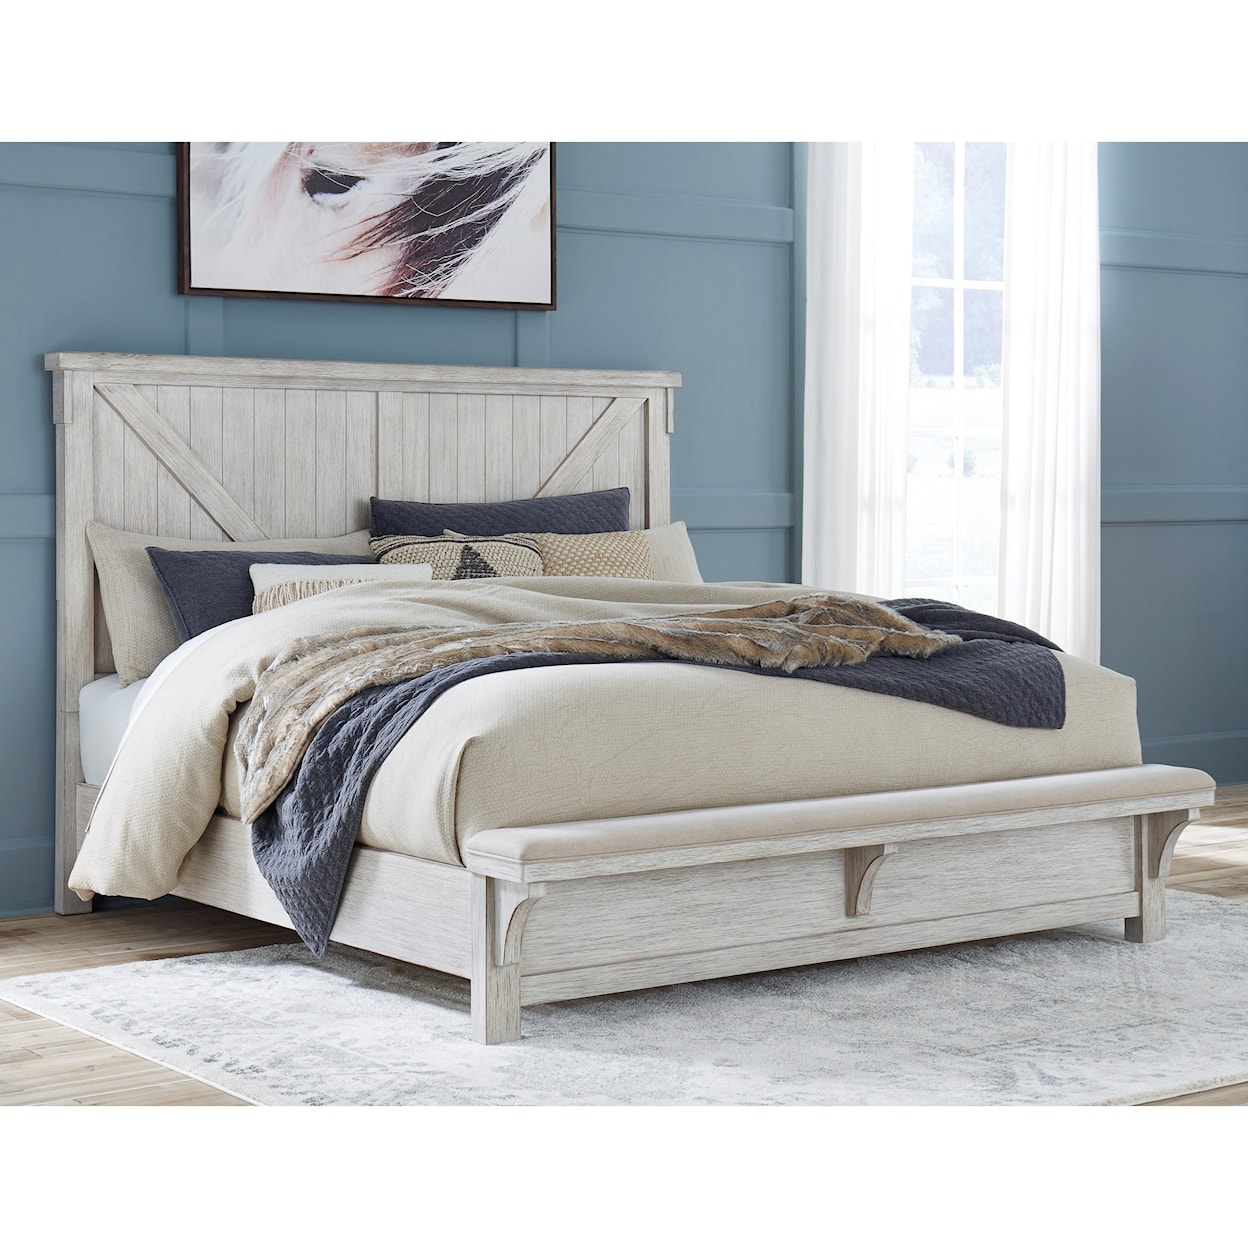 Ashley Signature Design Brashland Calfornia King Bed with Footboard Bench